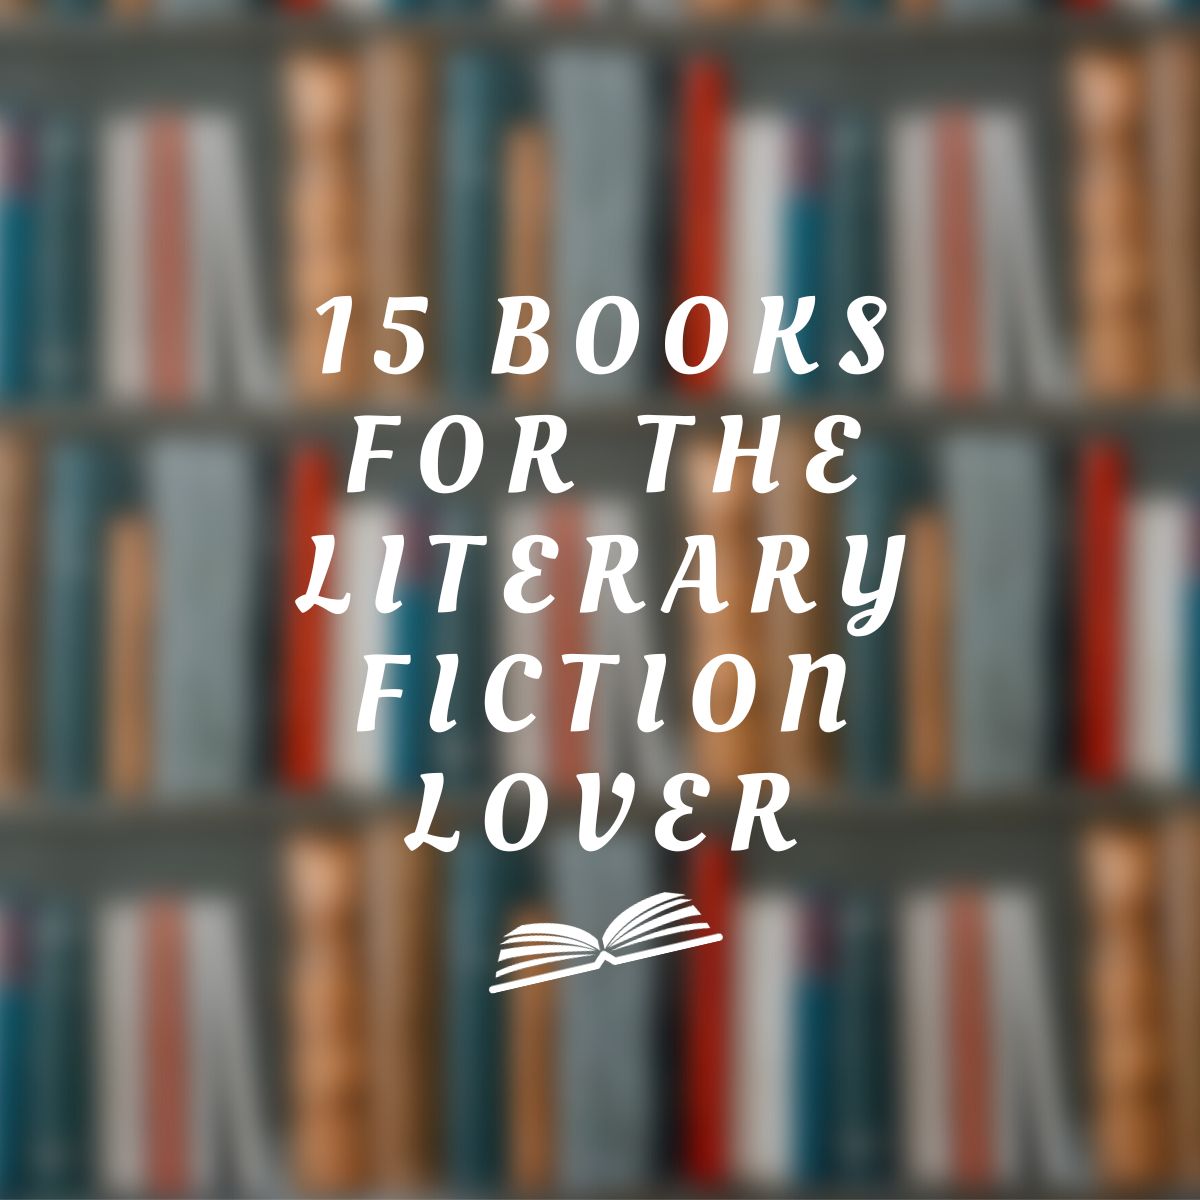 15 Books for the Literary Fiction Lover